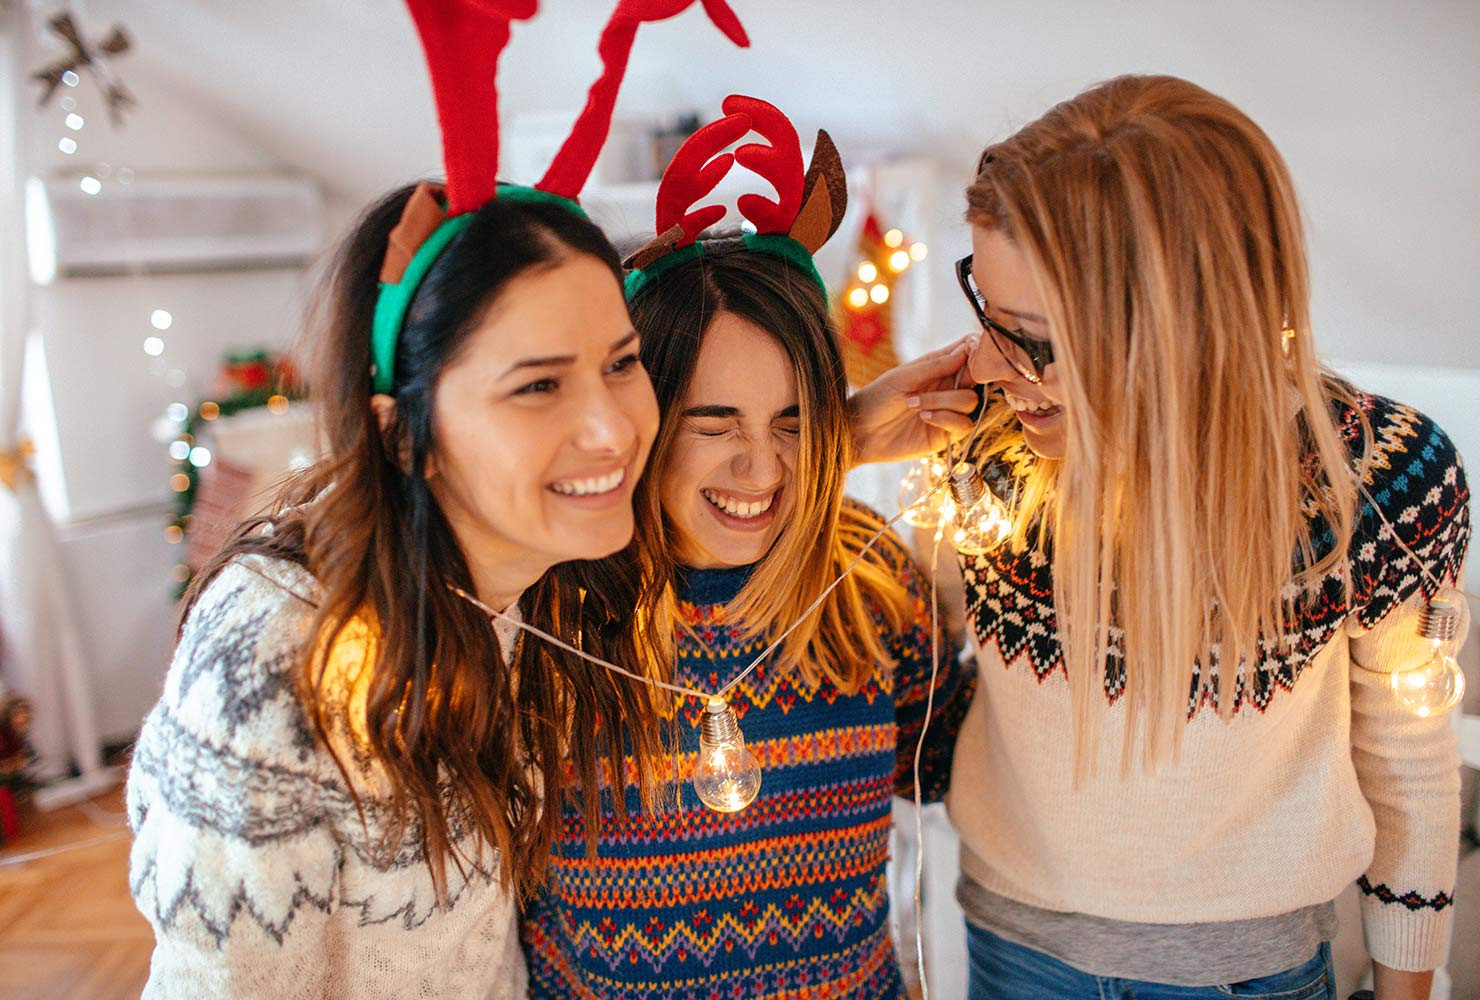 Group Christmas Party Ideas
 Top 30 Christmas Party Games Everyone Will Love